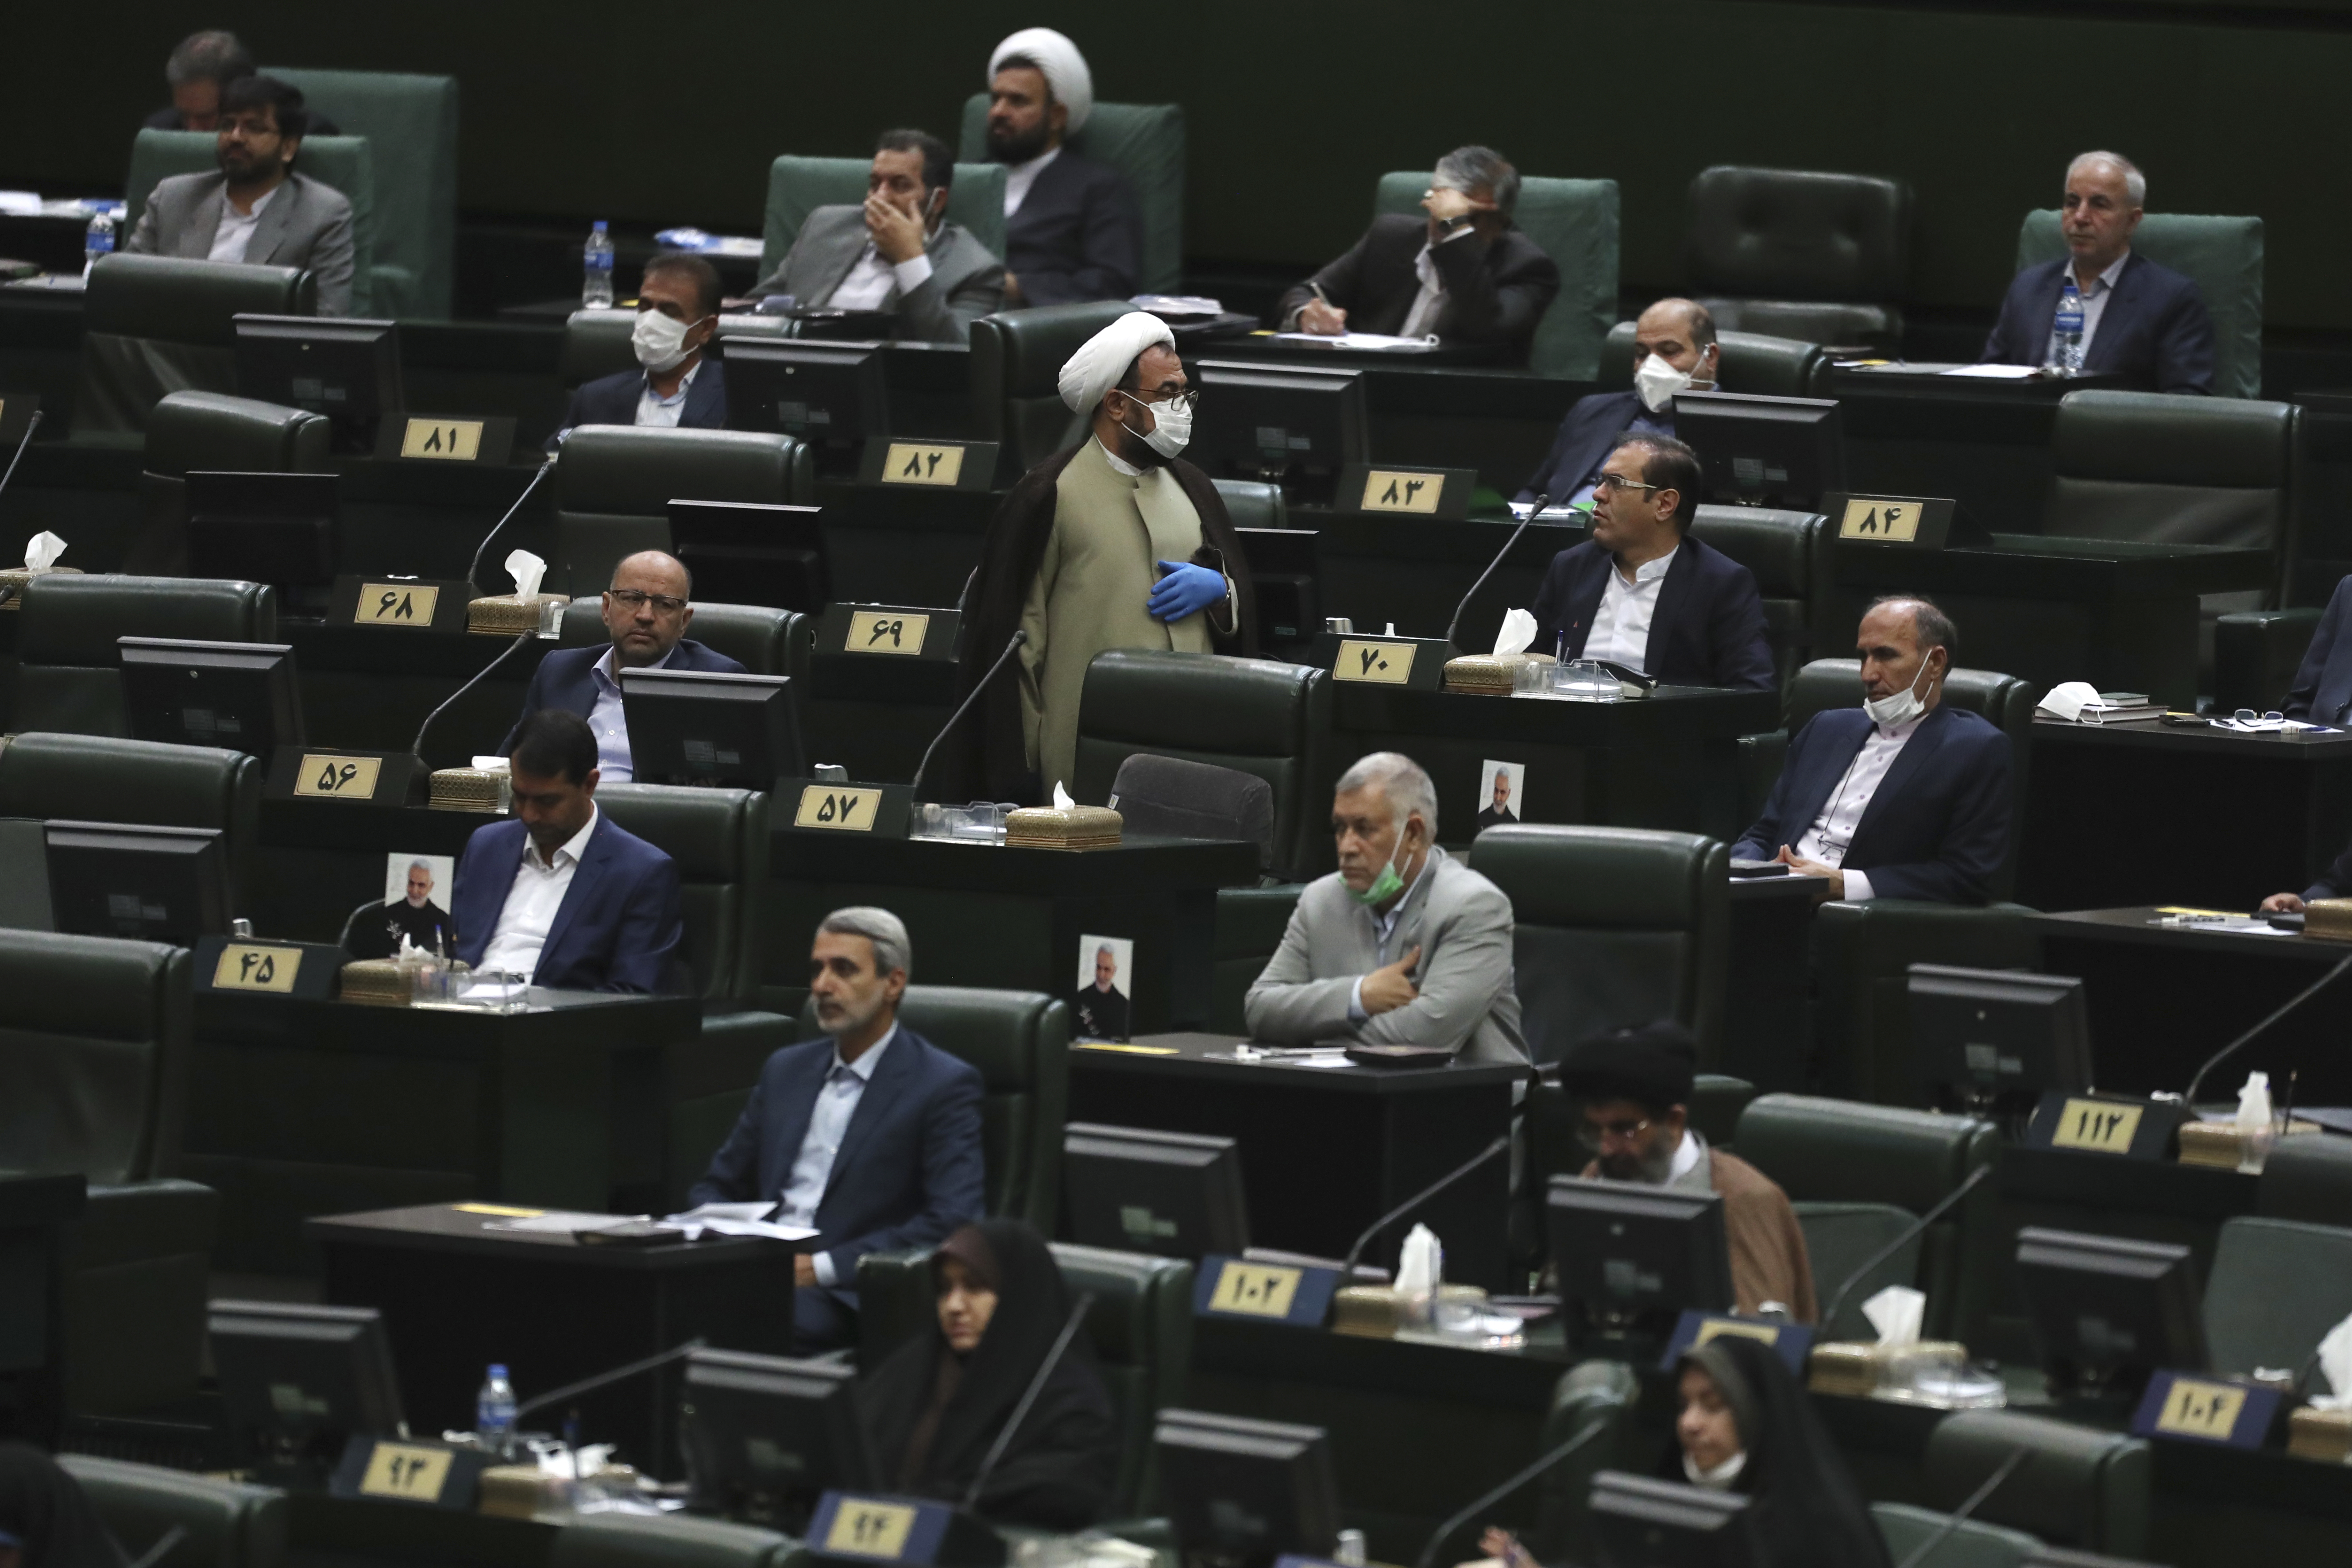 Lawmakers listen to a speech during the inauguration ceremony of Iran's new parliament, in Tehran, Iran, Wednesday, May, 27, 2020. Iran convened its newly elected parliament, dominated by conservative lawmakers and under strict social distancing regulations, as the country struggles to curb the spread of coronavirus that has hit the nation hard. Iran is grappling with one of the deadliest outbreaks in the Middle East. (AP Photo/Vahid Salemi)